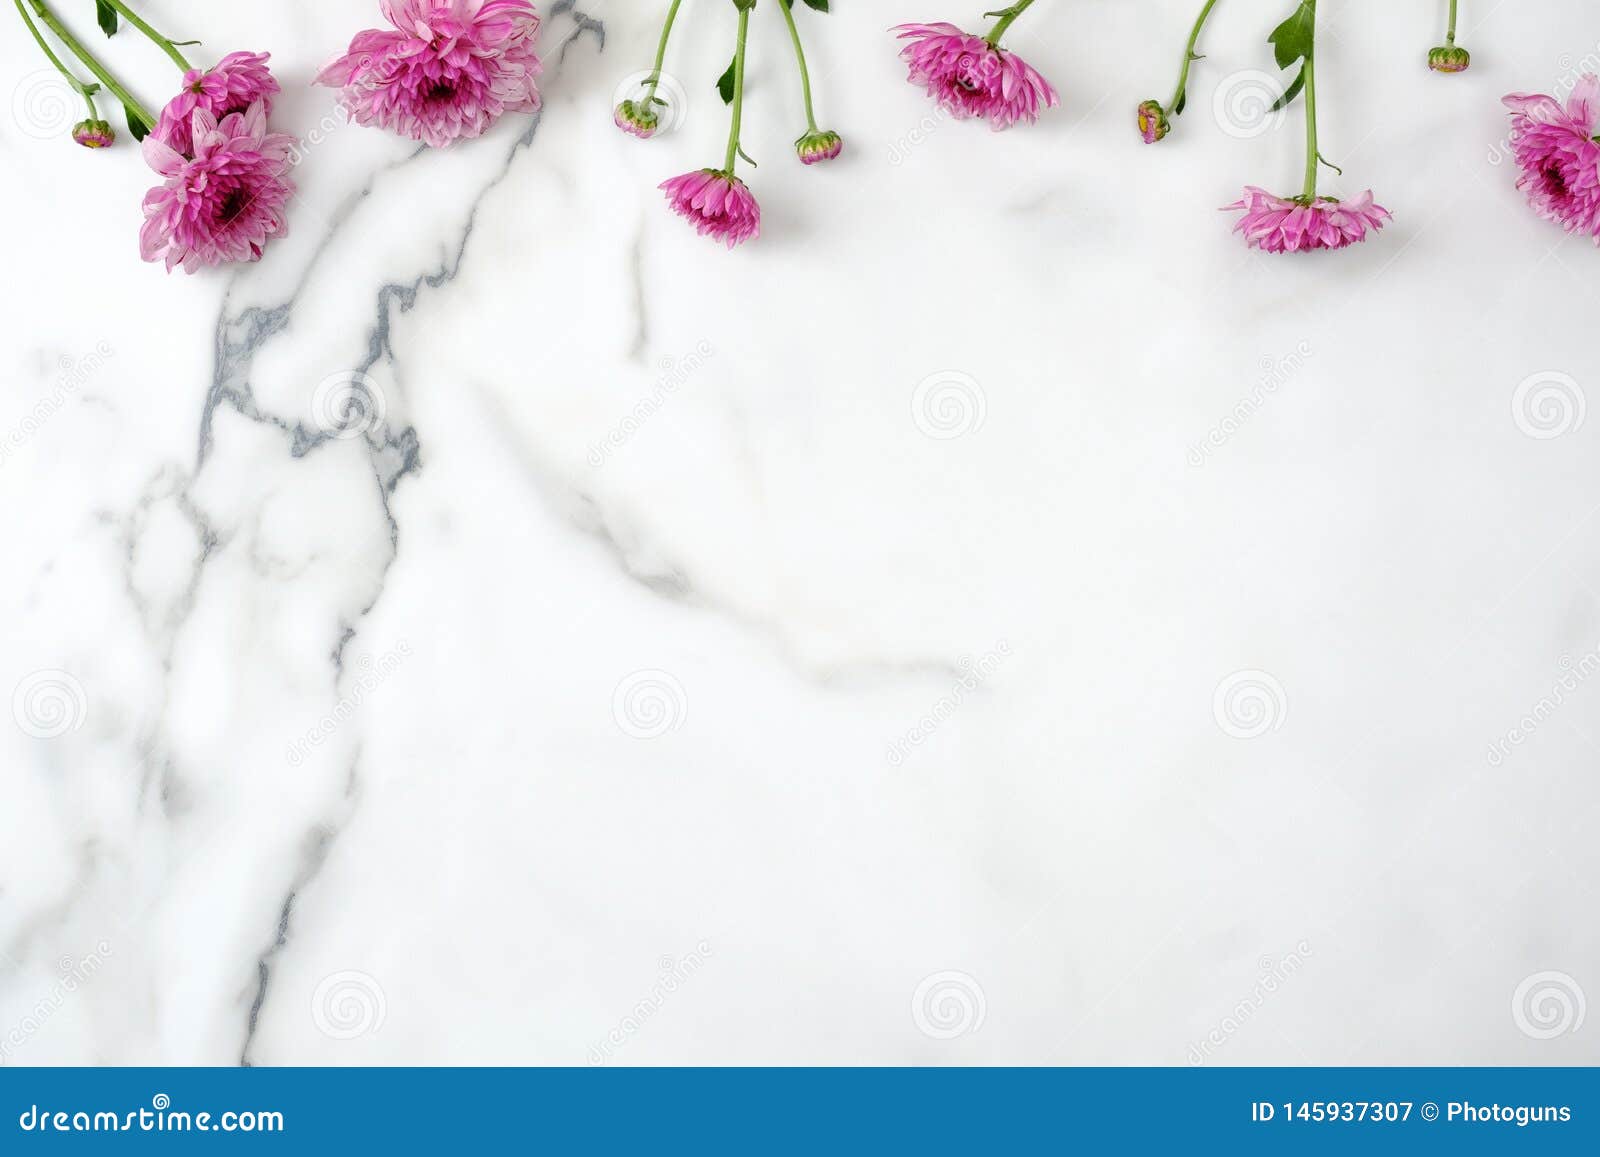 Flower Top Border Frame. Pink Daisy Flowers Head Scattered on Marble ...